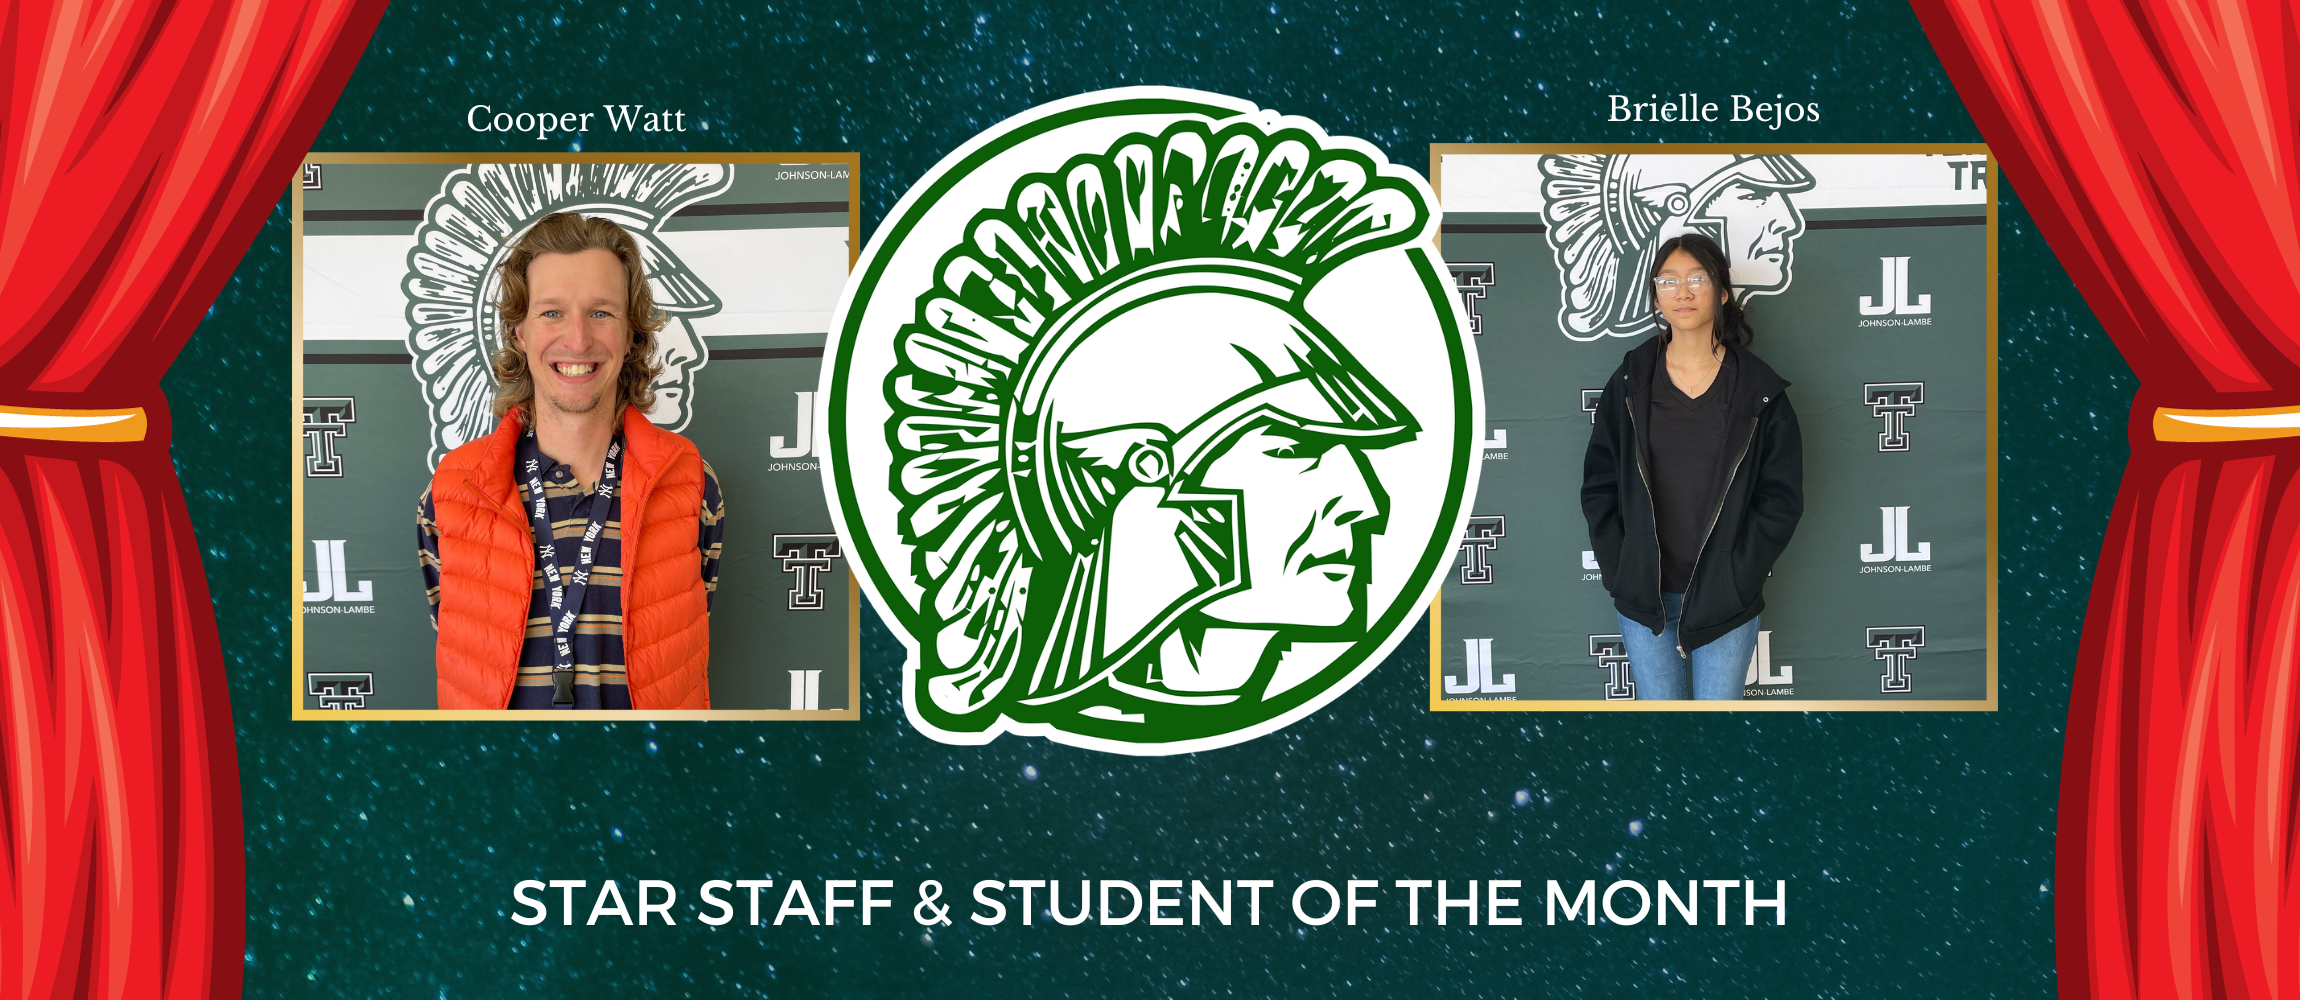 Star Staff and Student recognition banner